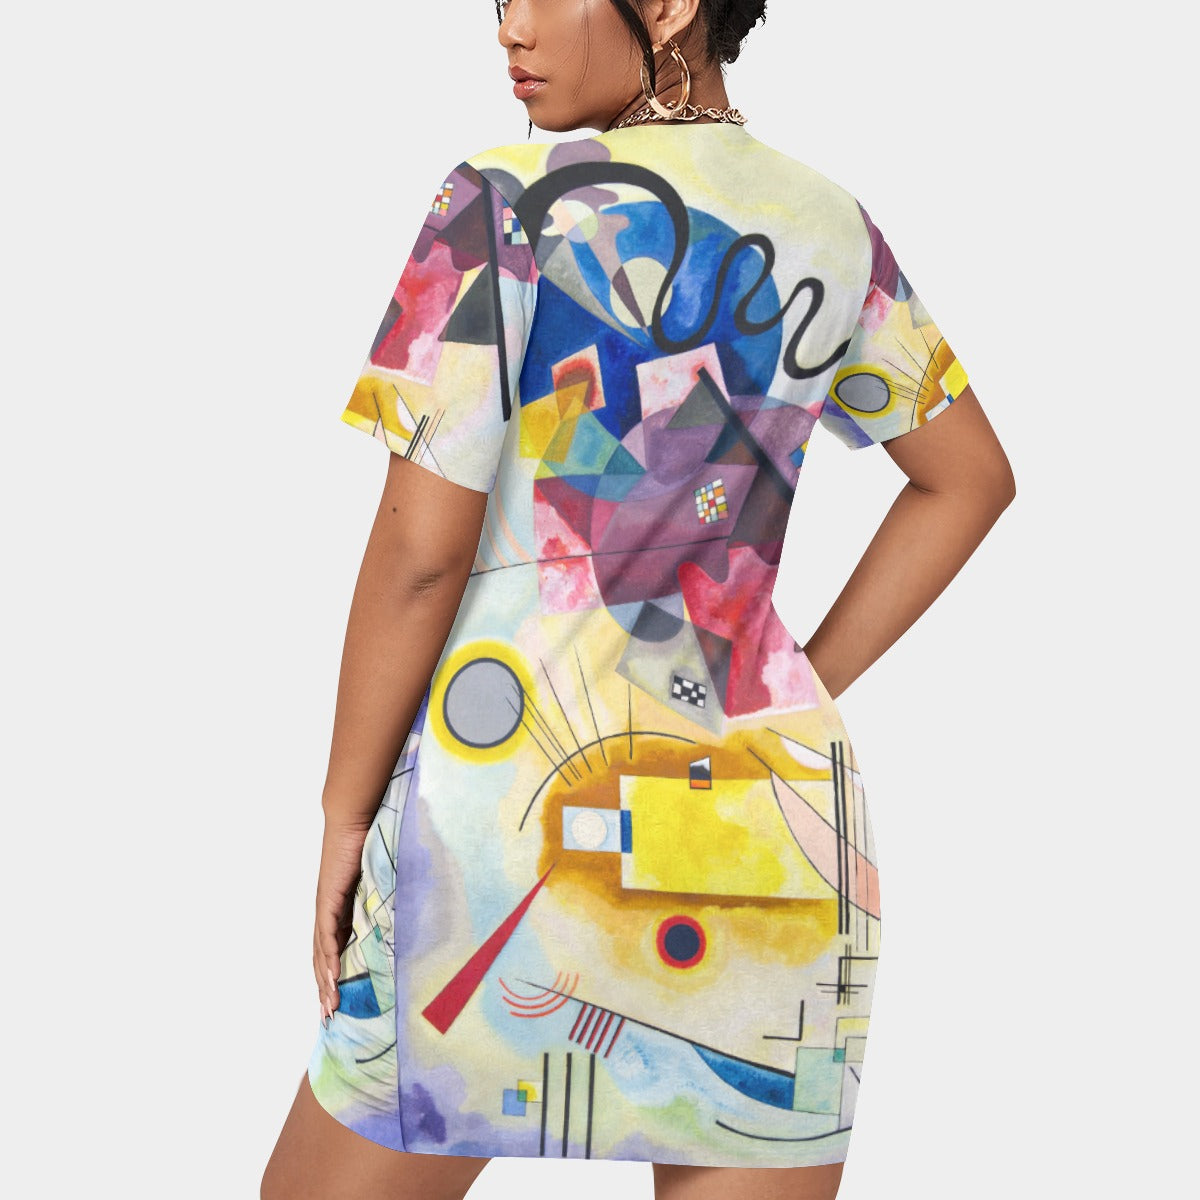 Plus size artistic clothing with eye-catching design